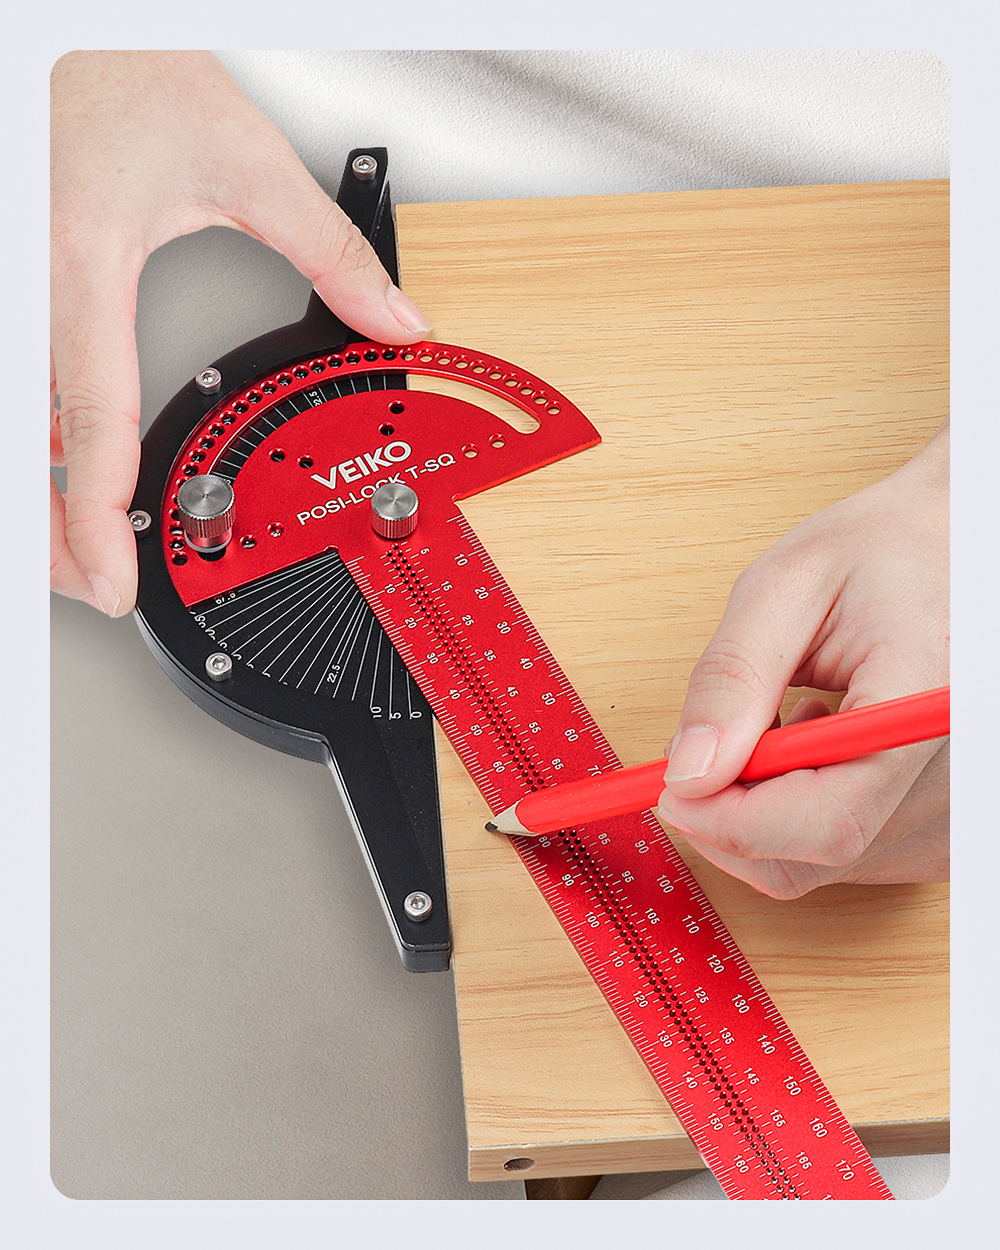 VEIKO-Aluminum-Alloy-300mm-Angle-Positioning-T-Square-Posi-Lock-Ruler-Woodworking-Edge-Ruler-Angle-M-1907927-7